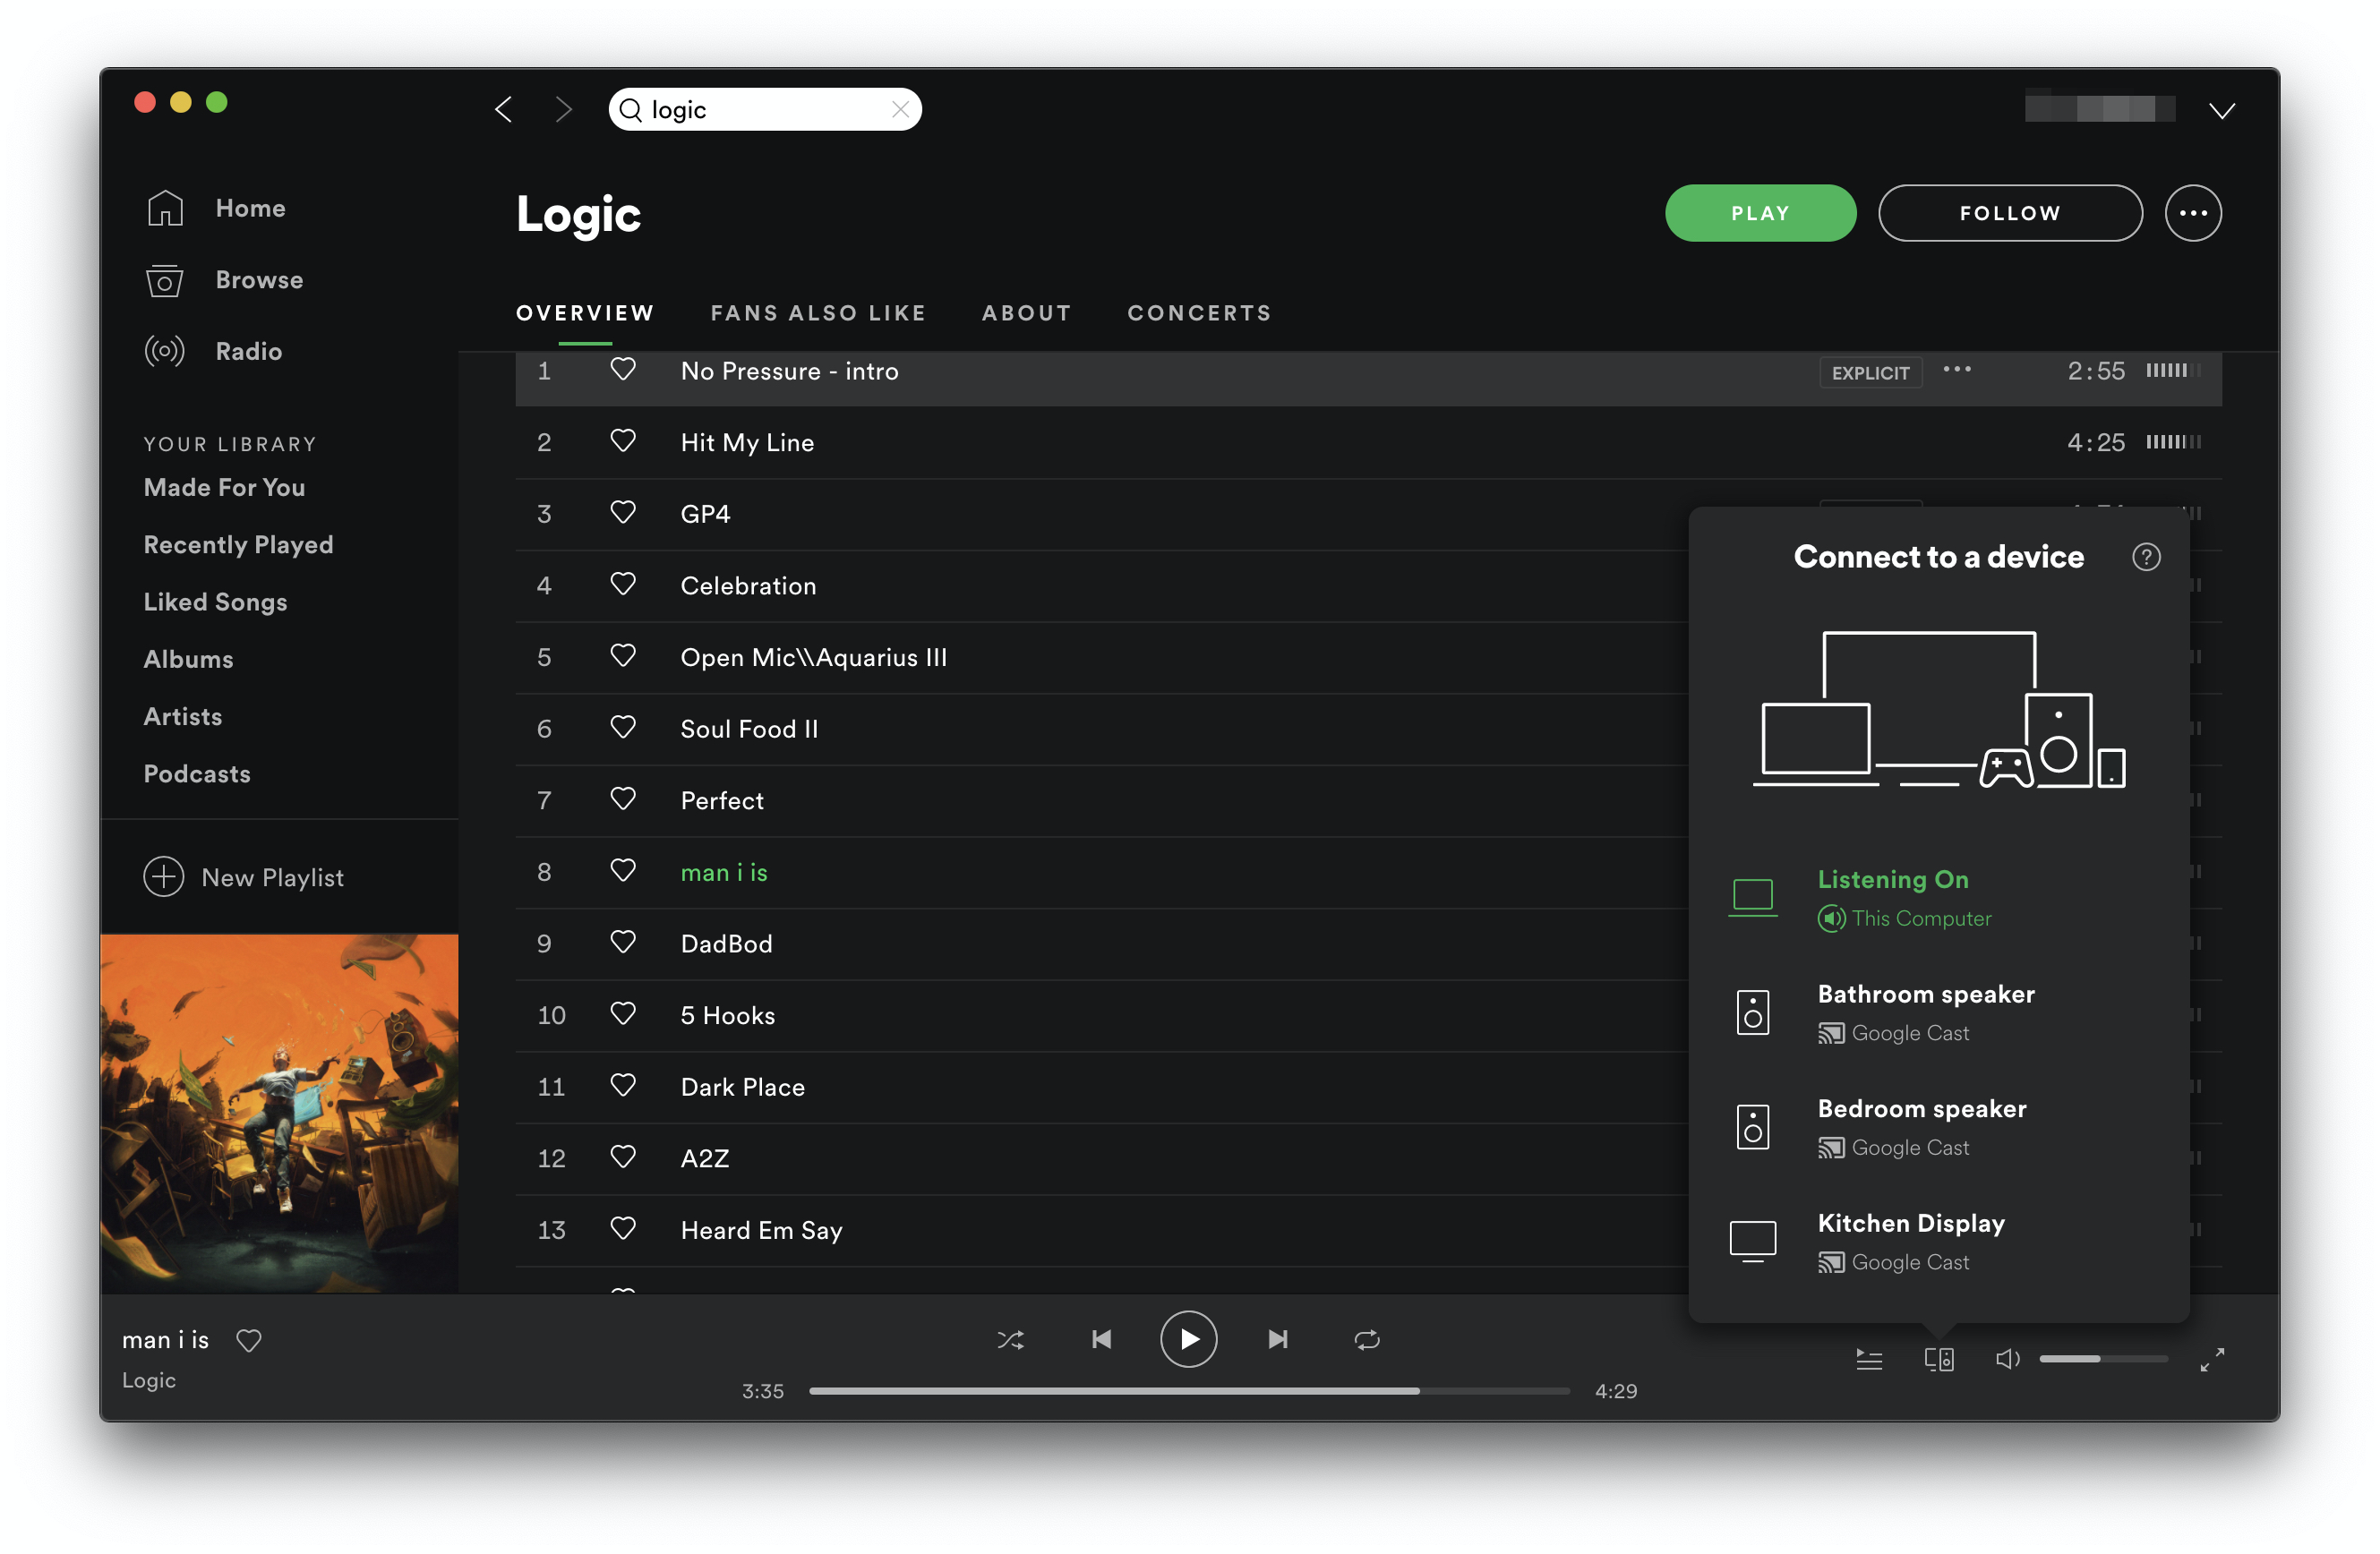 Spotify's desktop adds support for Chromecast - 9to5Google